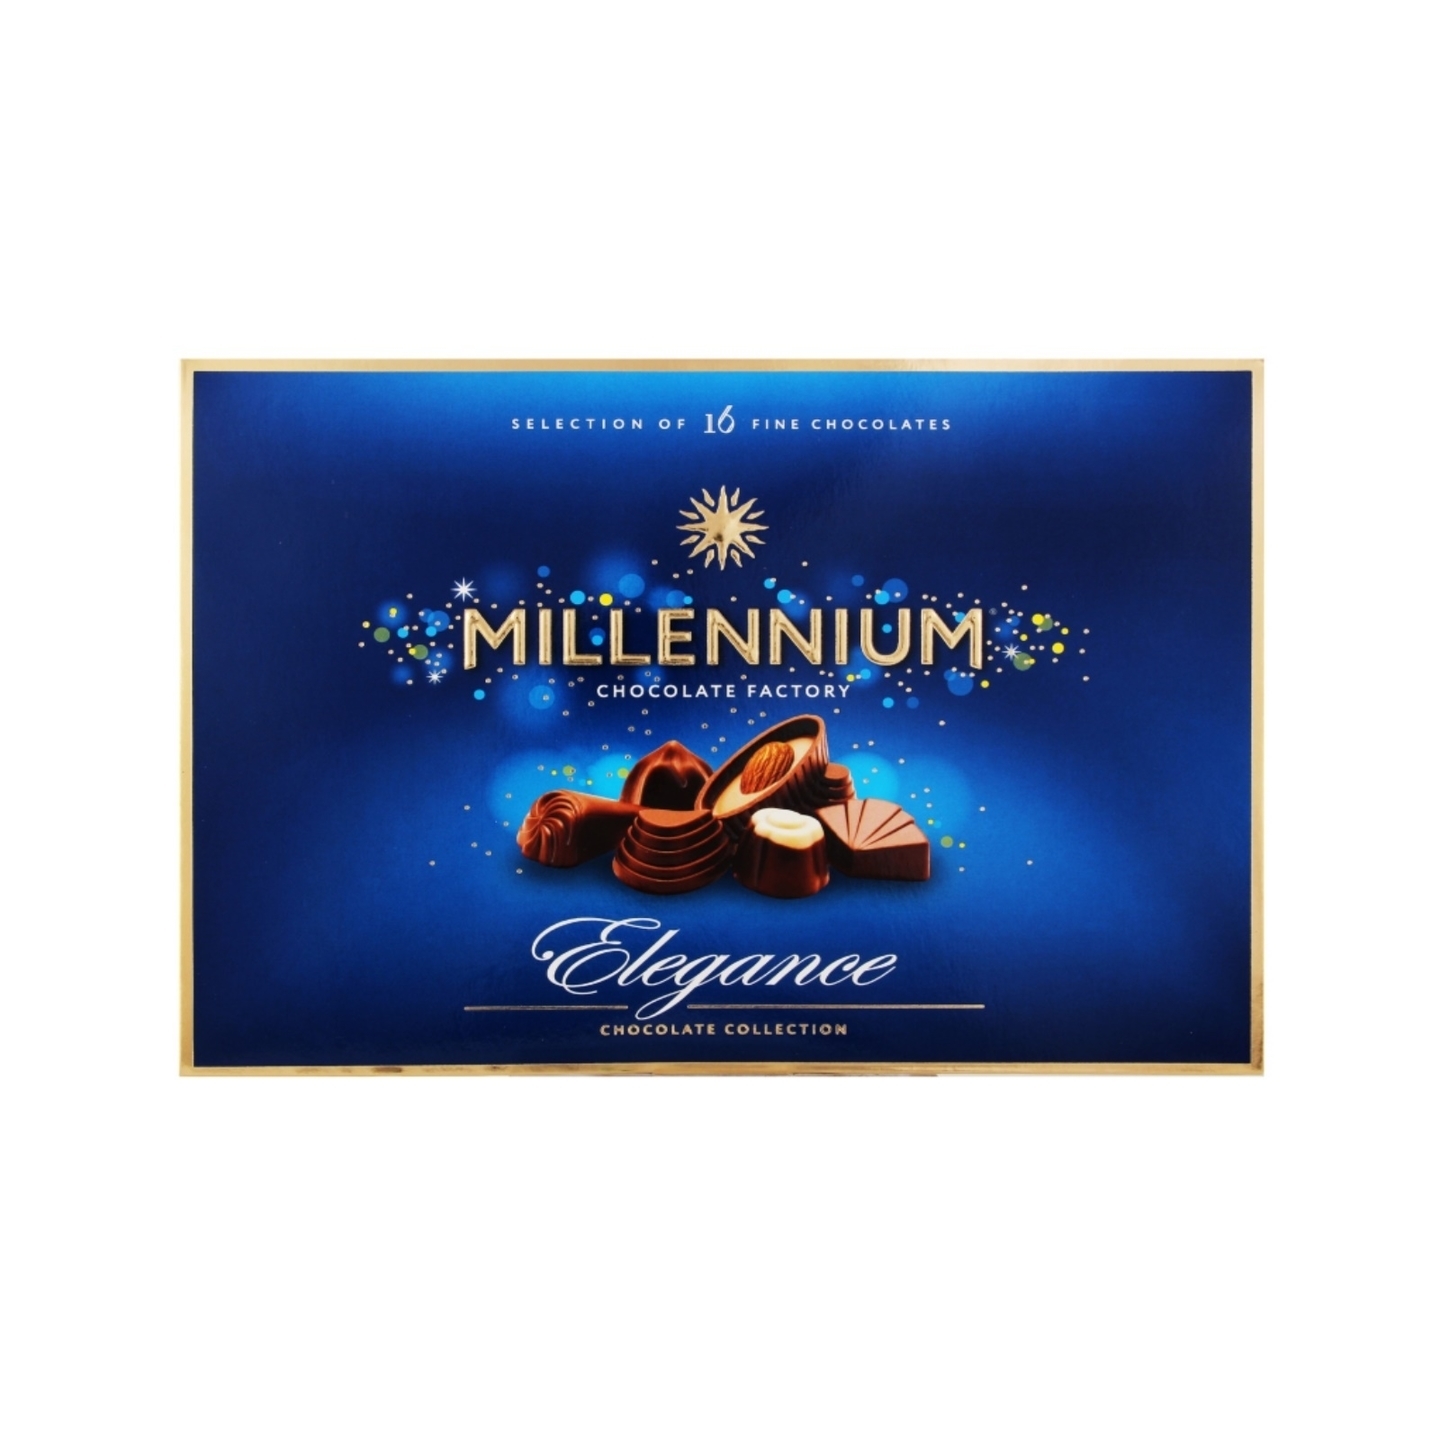 Millennium Elegance Delicate Milk Chocolate with Assorted Exclusive Fillings.